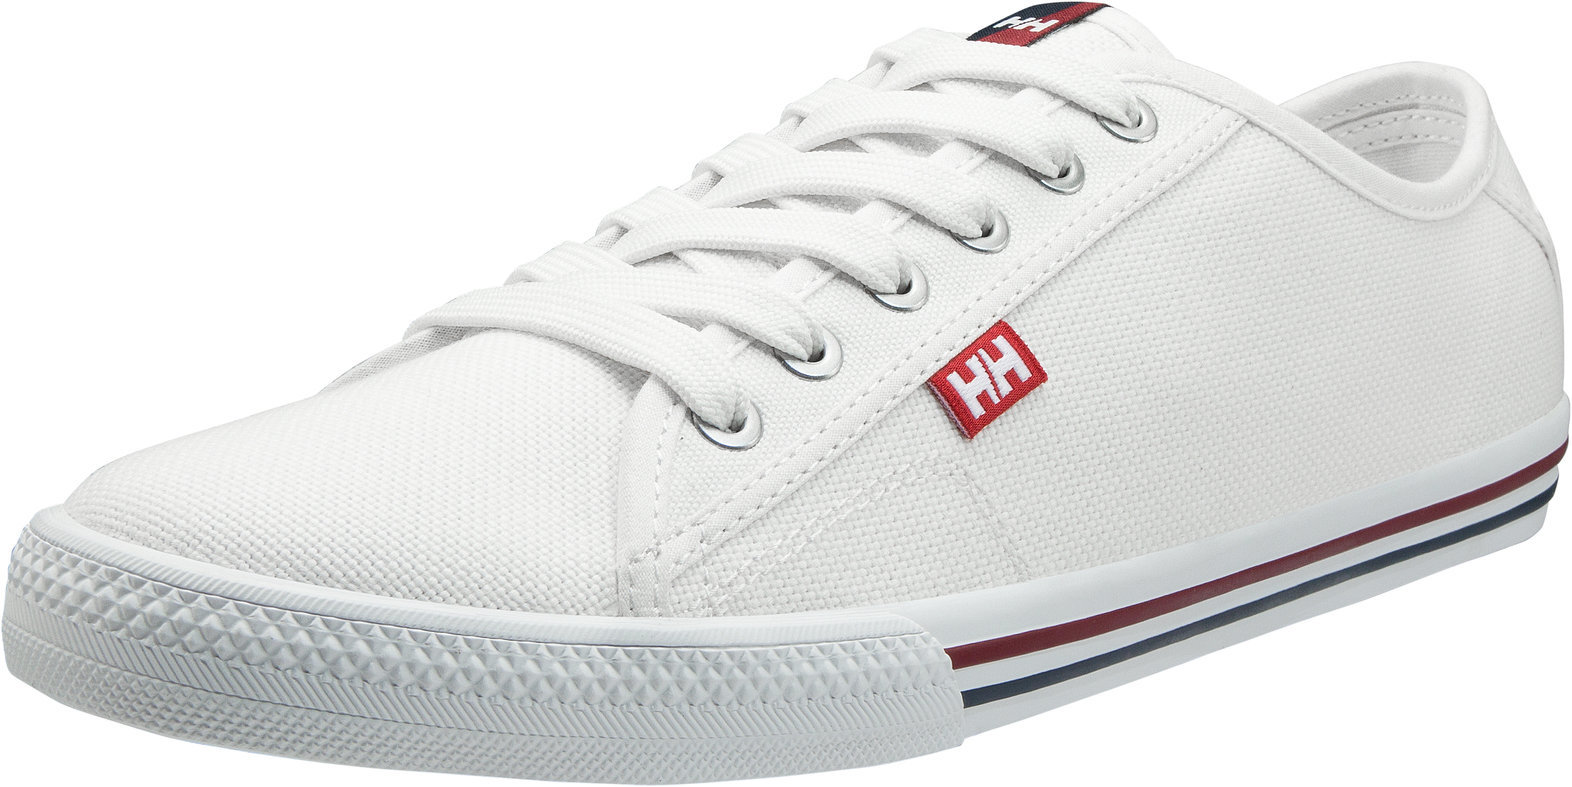 Mens Sailing Shoes Helly Hansen FJORD CANVAS OFF WHITE 42